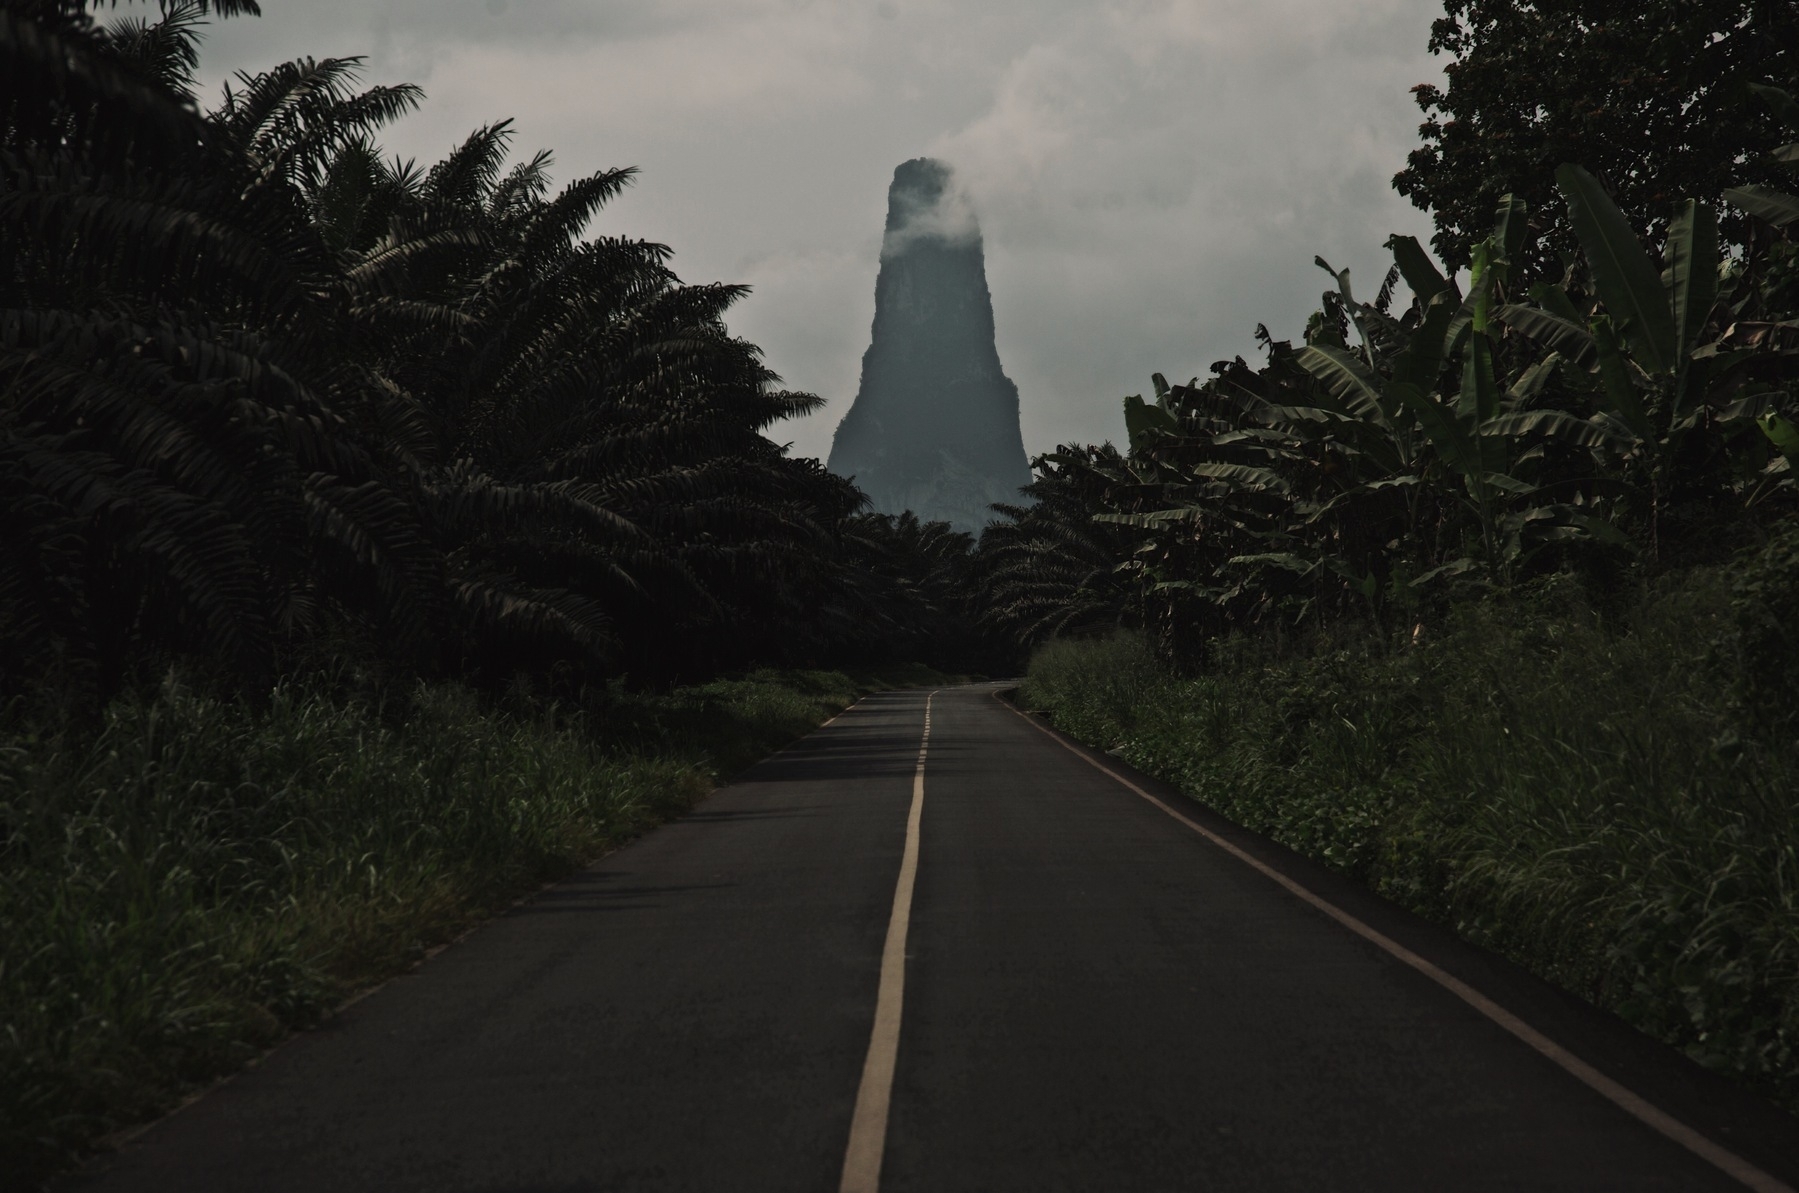 A quiet country road with palm trees on both sides and, on the background, a volcanic peak that looks like a needle.